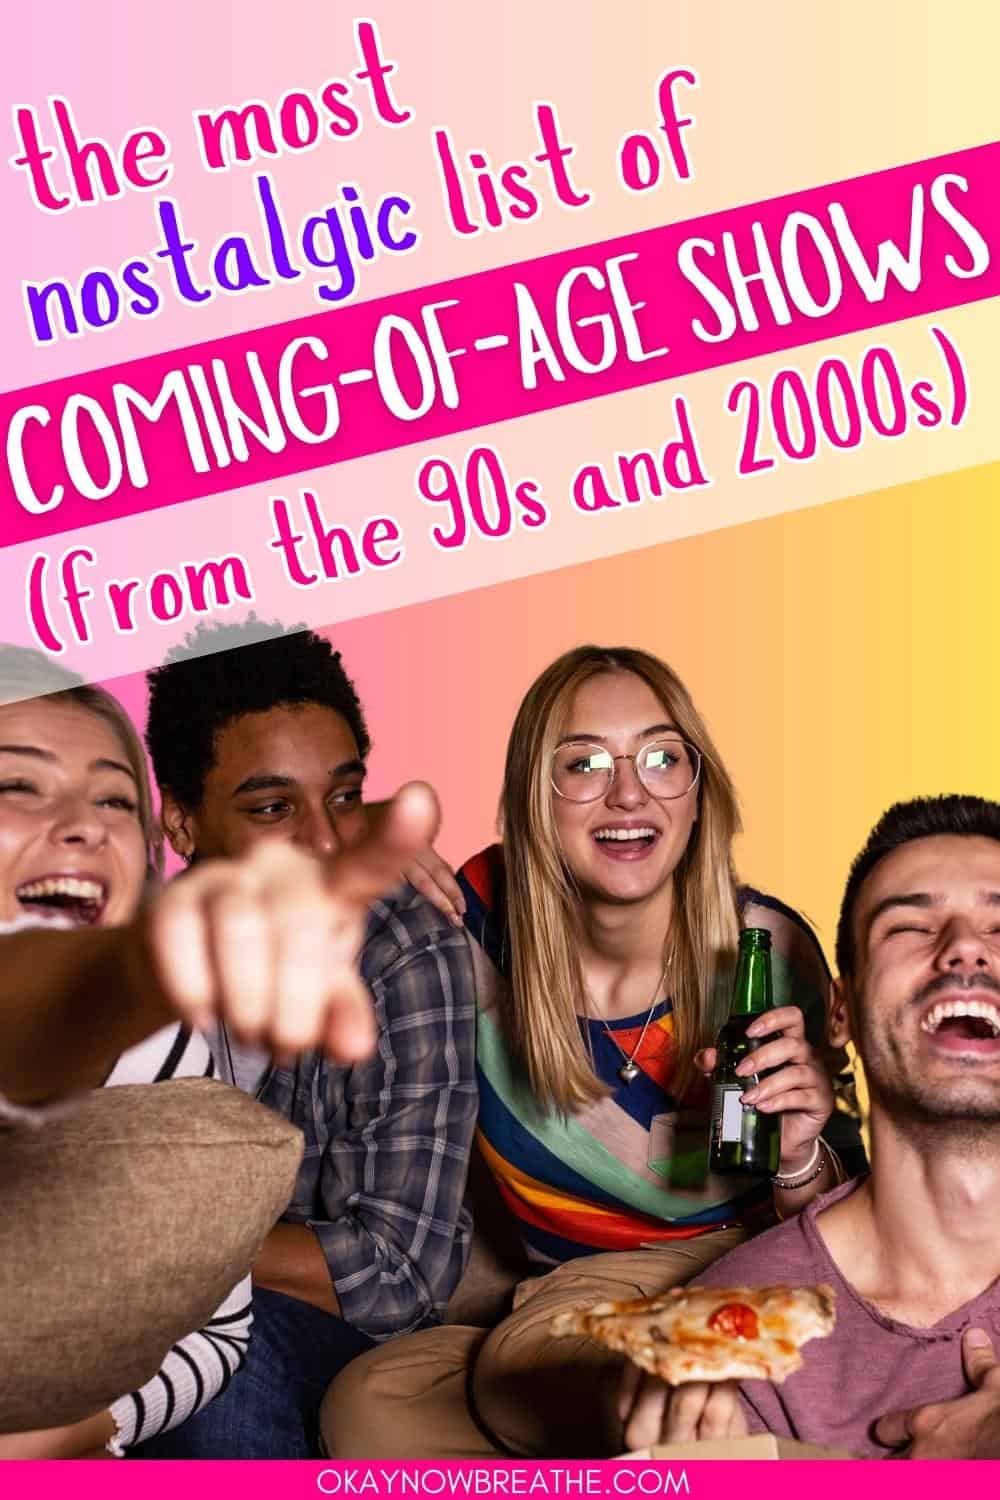 There is a group of young adult friends drink beer and eating pizza laughing and pointing. Above them, there is text that says: the most nostalgic list of coming-of-age shows (from the 90s and 2000s)